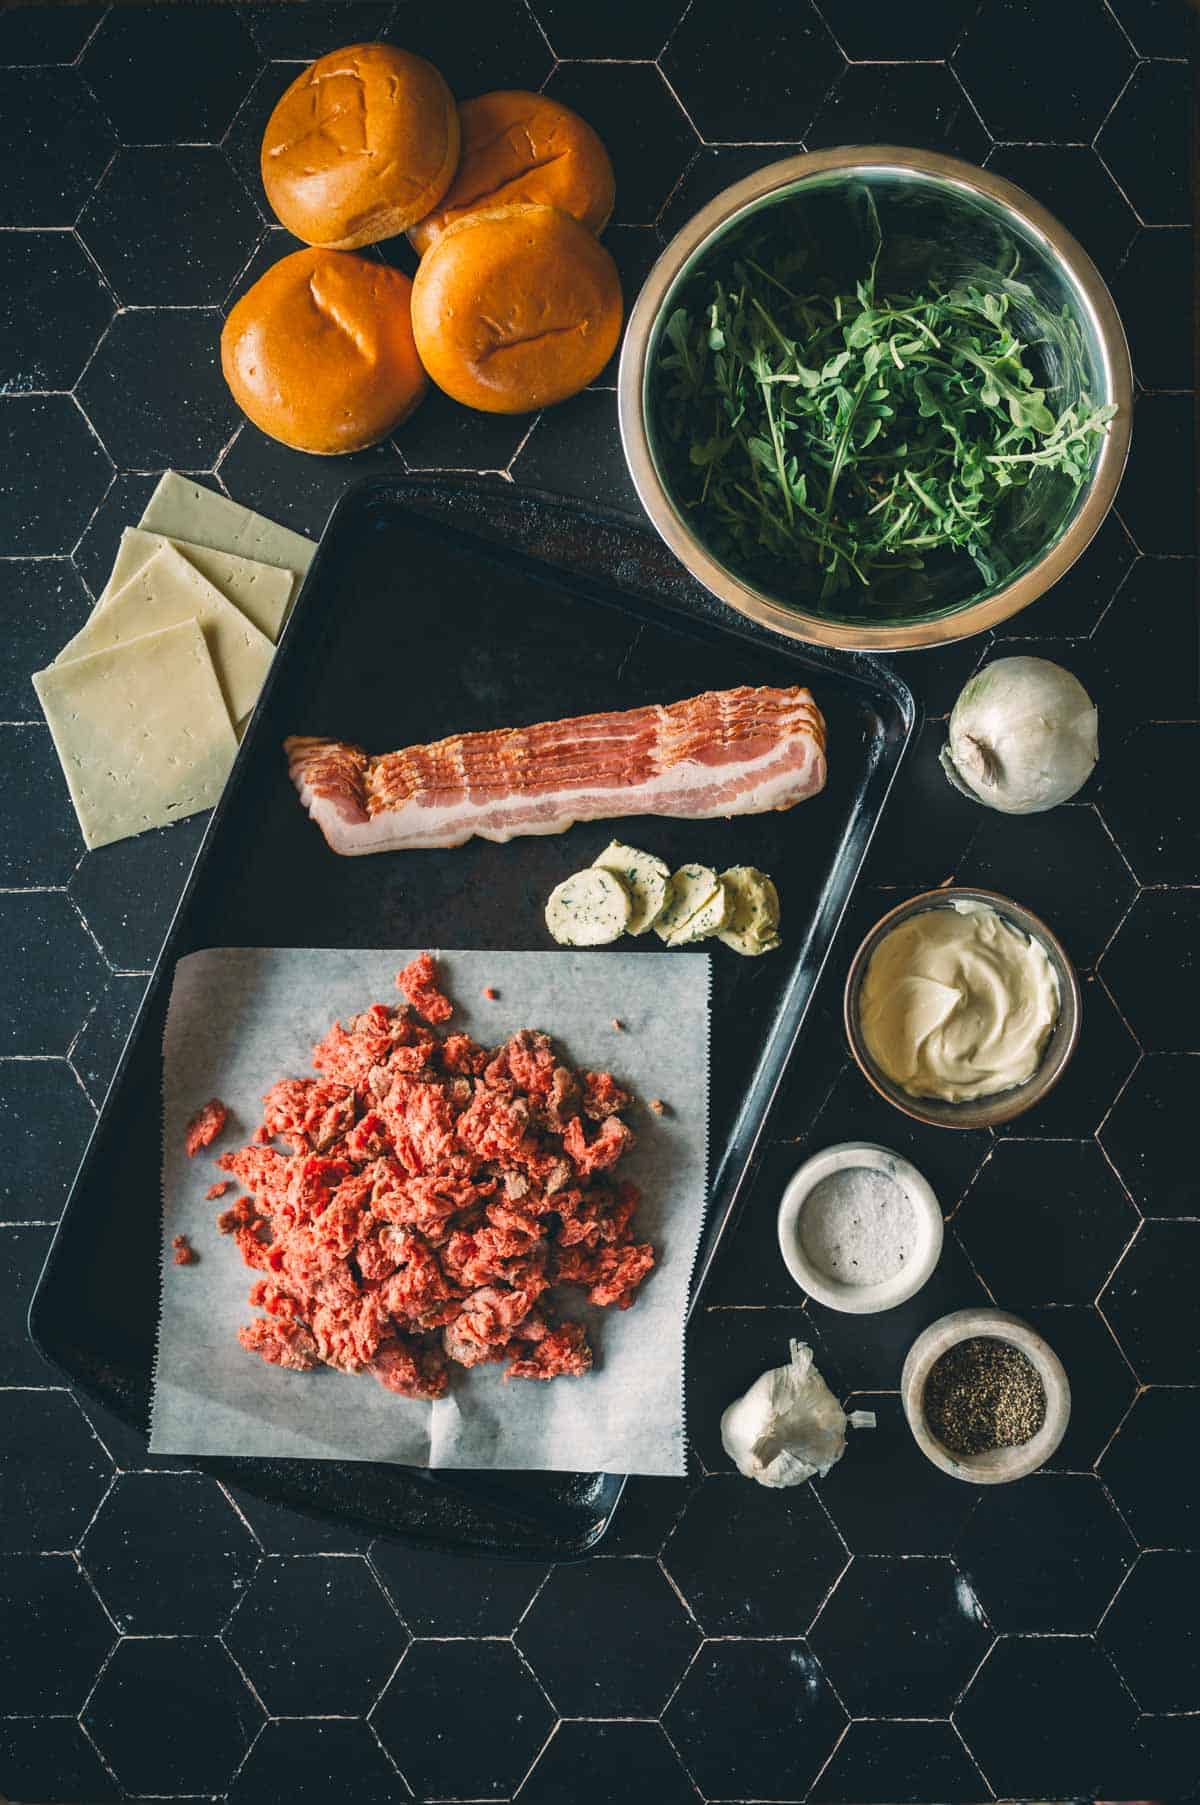 Ingredients for making burgers, including ground meat, bacon, cheese slices, brioche buns, arugula, garlic, salt, pepper, butter, and mayonnaise, arranged on a black surface.